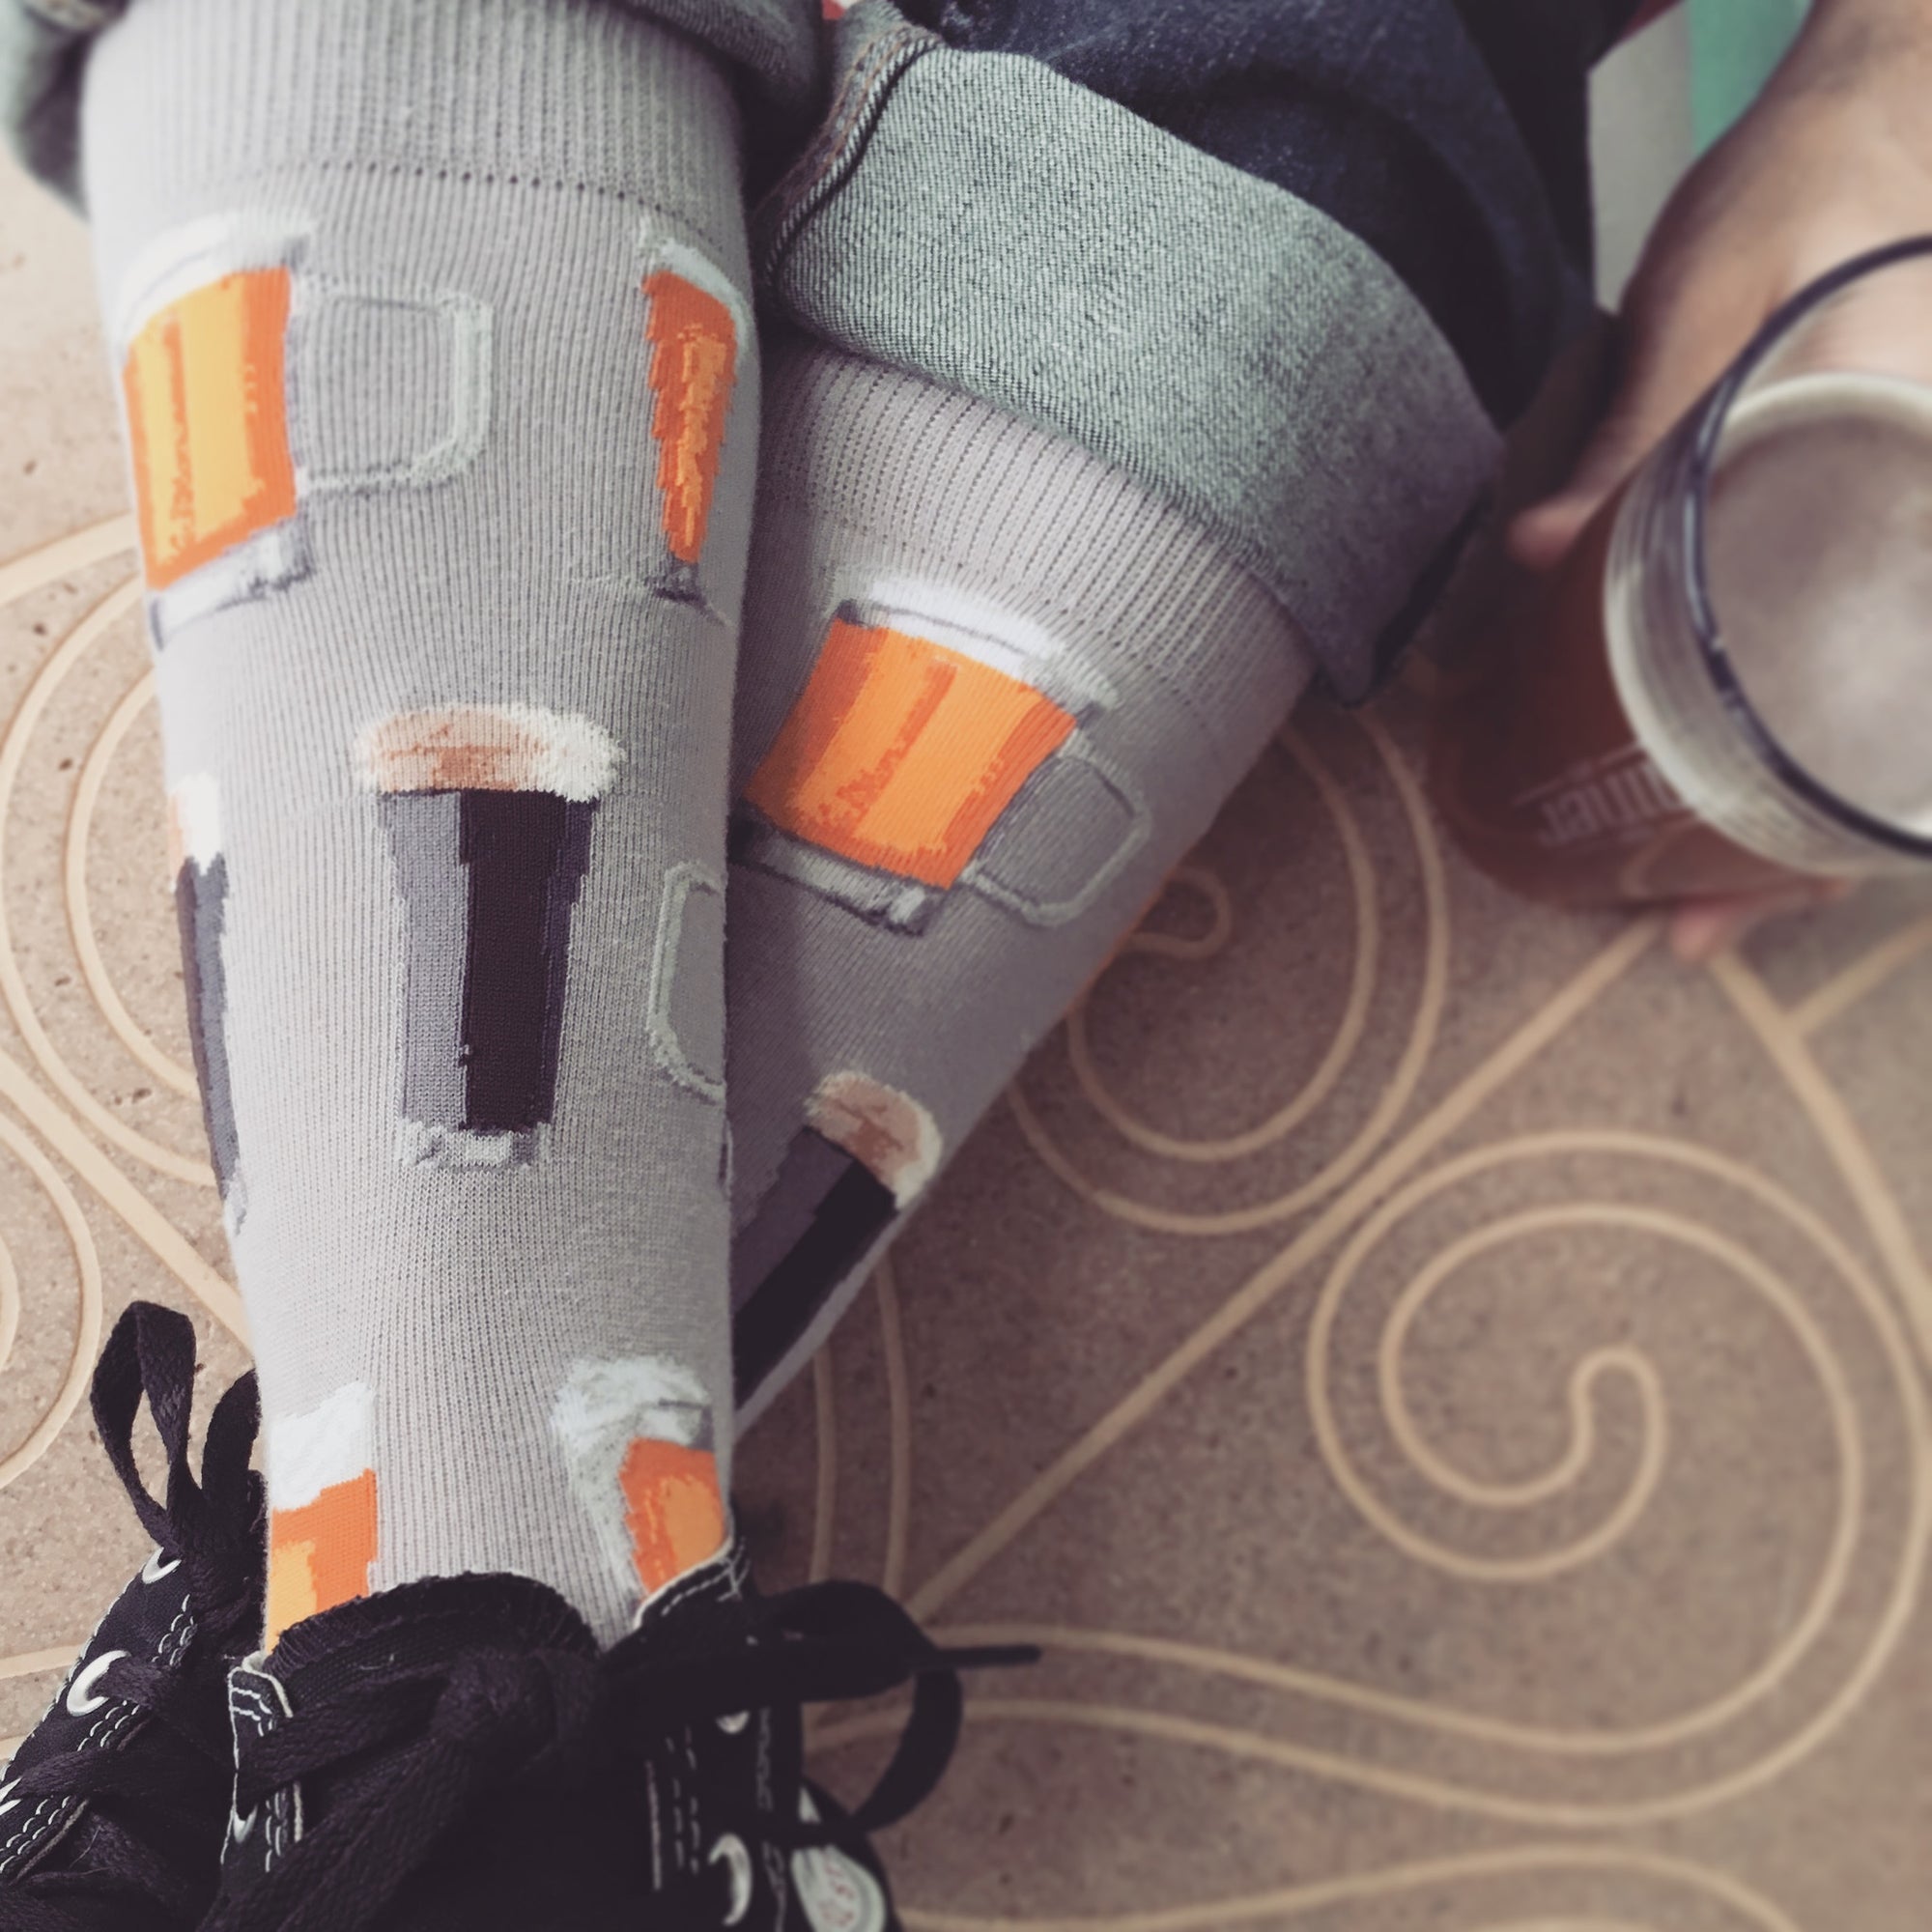 Beer socks featuring all sorts of brew on a gray background are worn by a beer enthusiast as he kicks back and drinks an IPA.